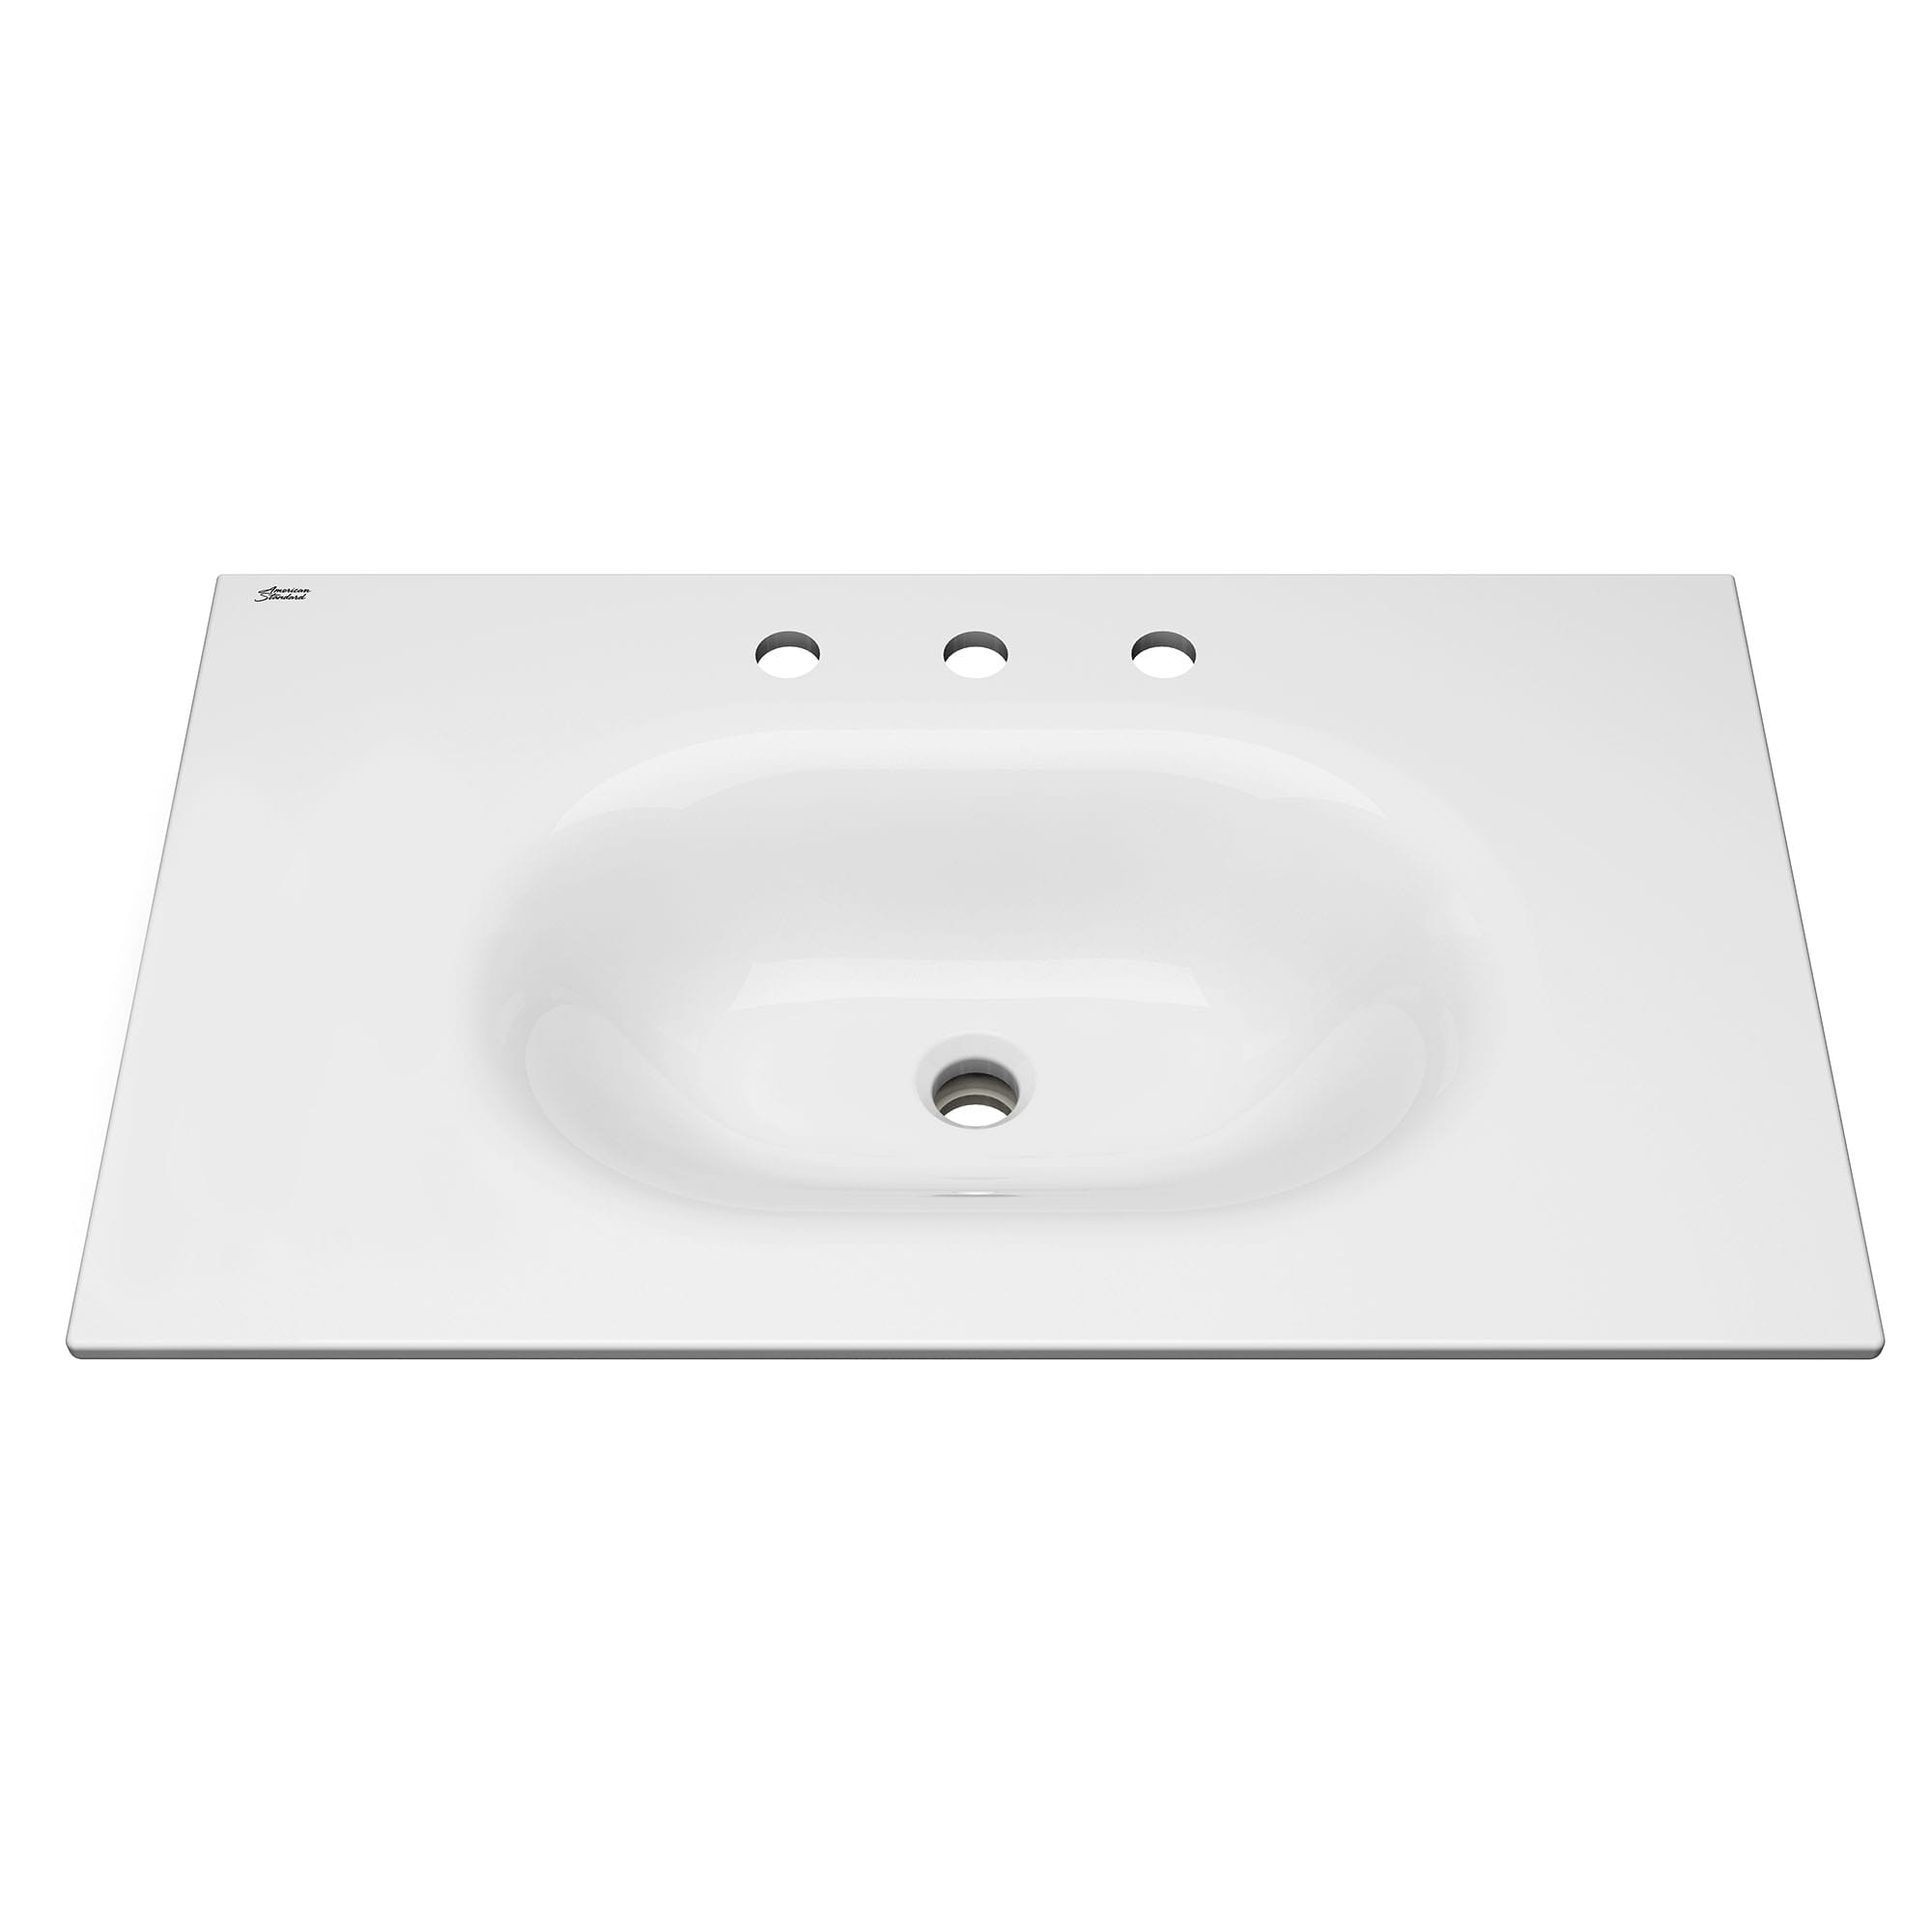 Studio S 33 Inch Vitreous China Vanity Sink Top 8 Inch Centers WHITE